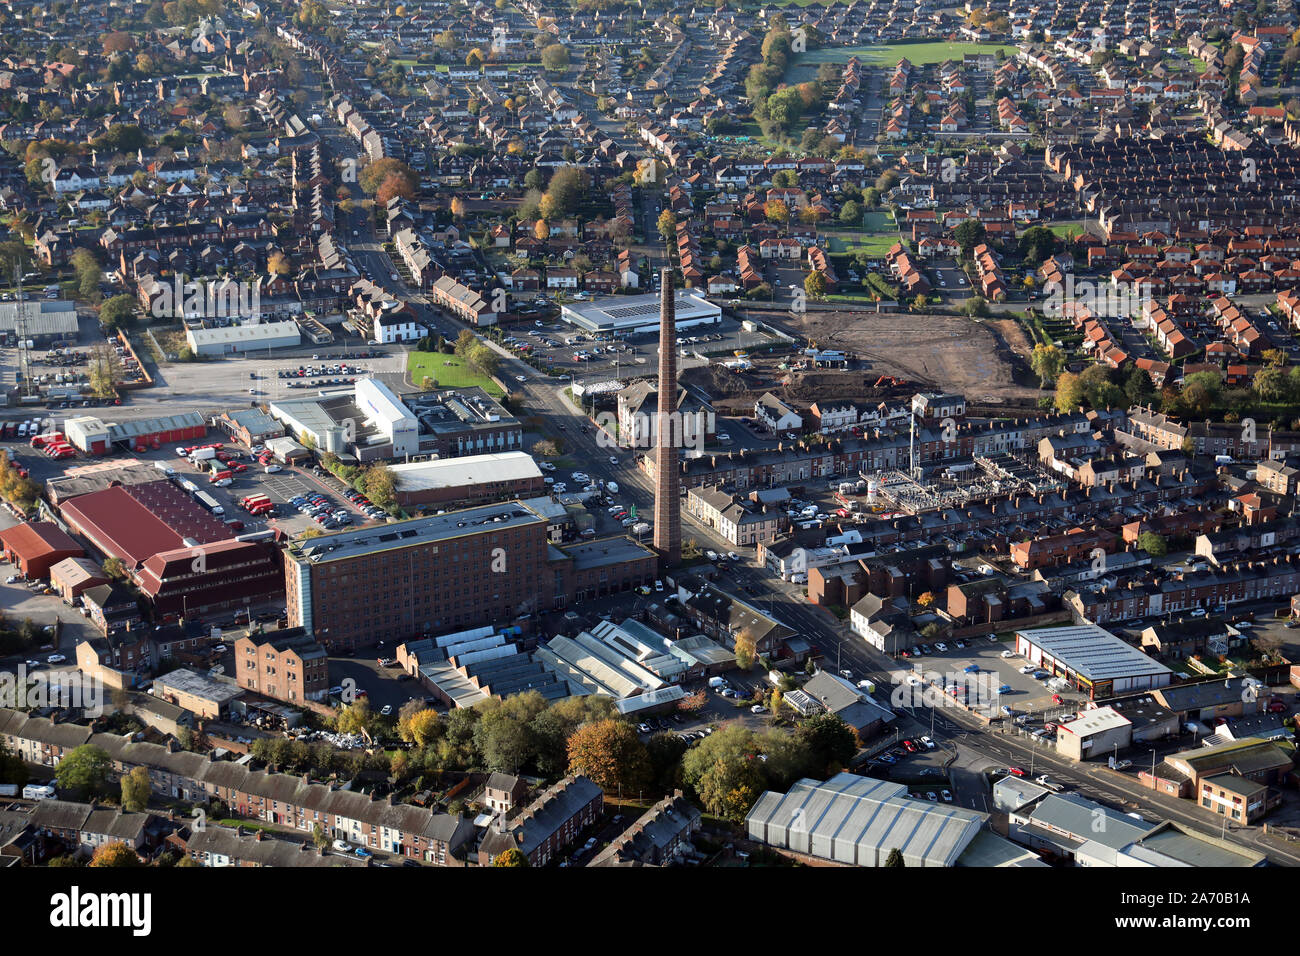 Aerial view of Dixon's Chimney, part of Shaddon Mill, in Carlisle. The scene of an untimely death on the 28th October 2019. Stock Photo